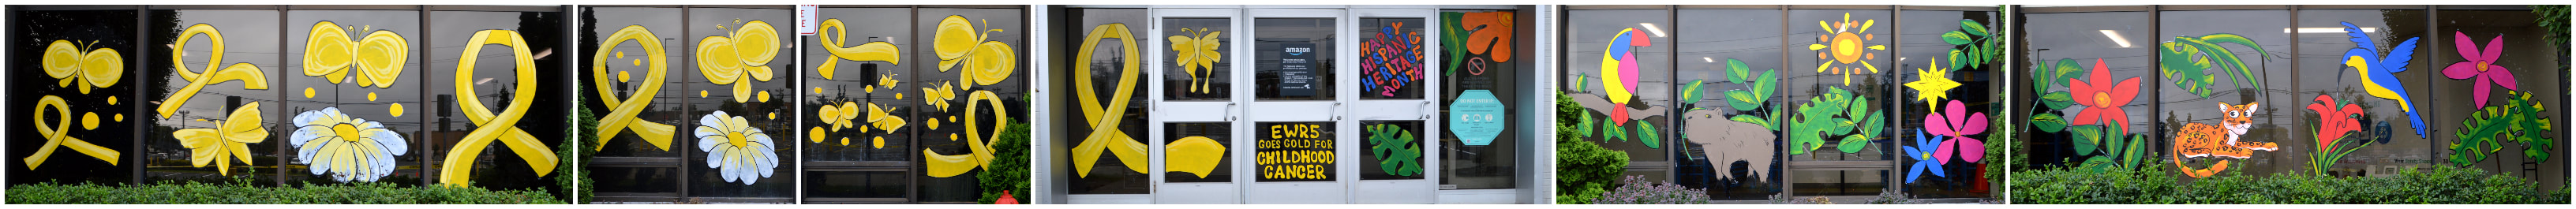 September Window Art at the Amazon EWR5 Warehouse in Avenel, Middlesex County, NJ, featuring Childhood Cancer Month and Celebrating Hispanic Heritage Month